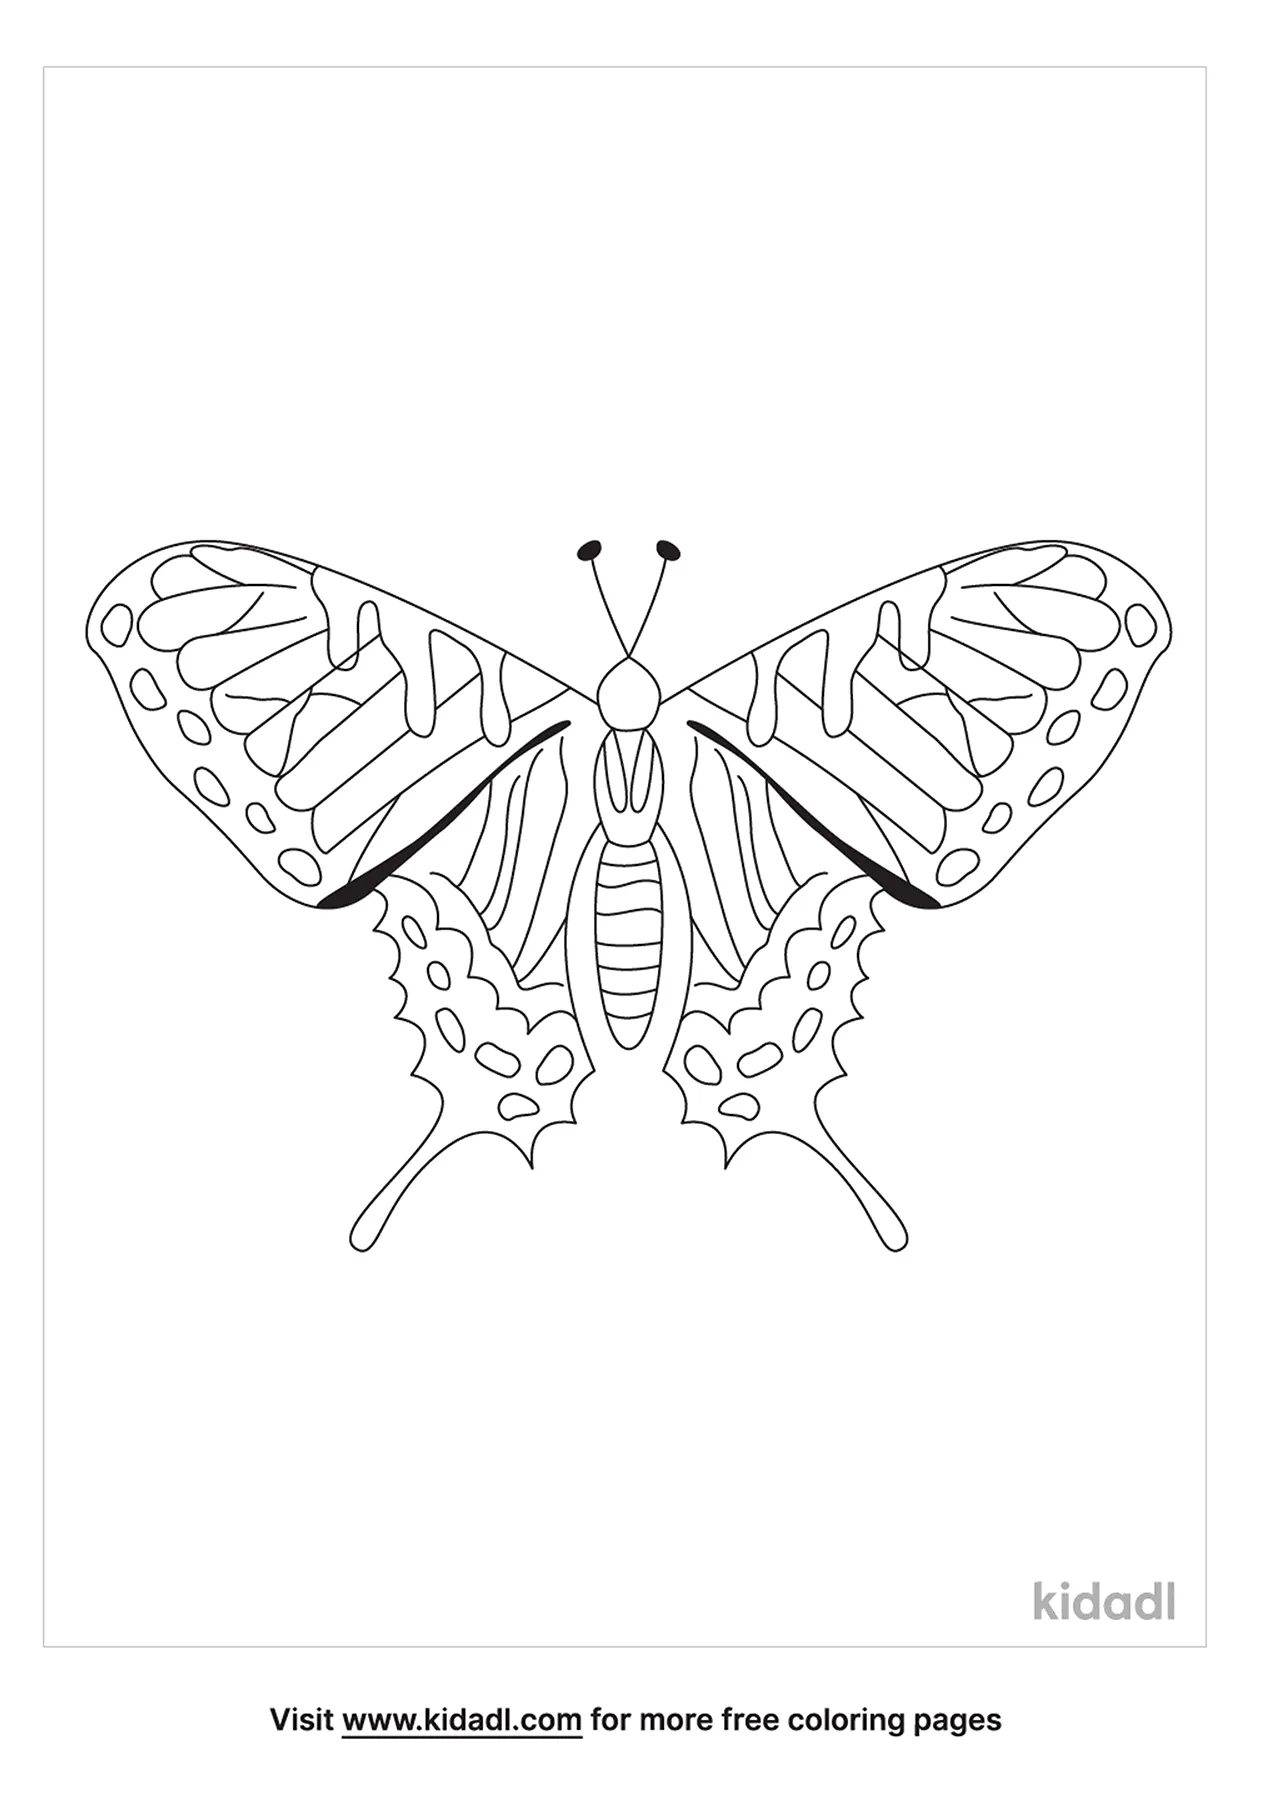 Tiger Swallowtail Butterfly Coloring Page